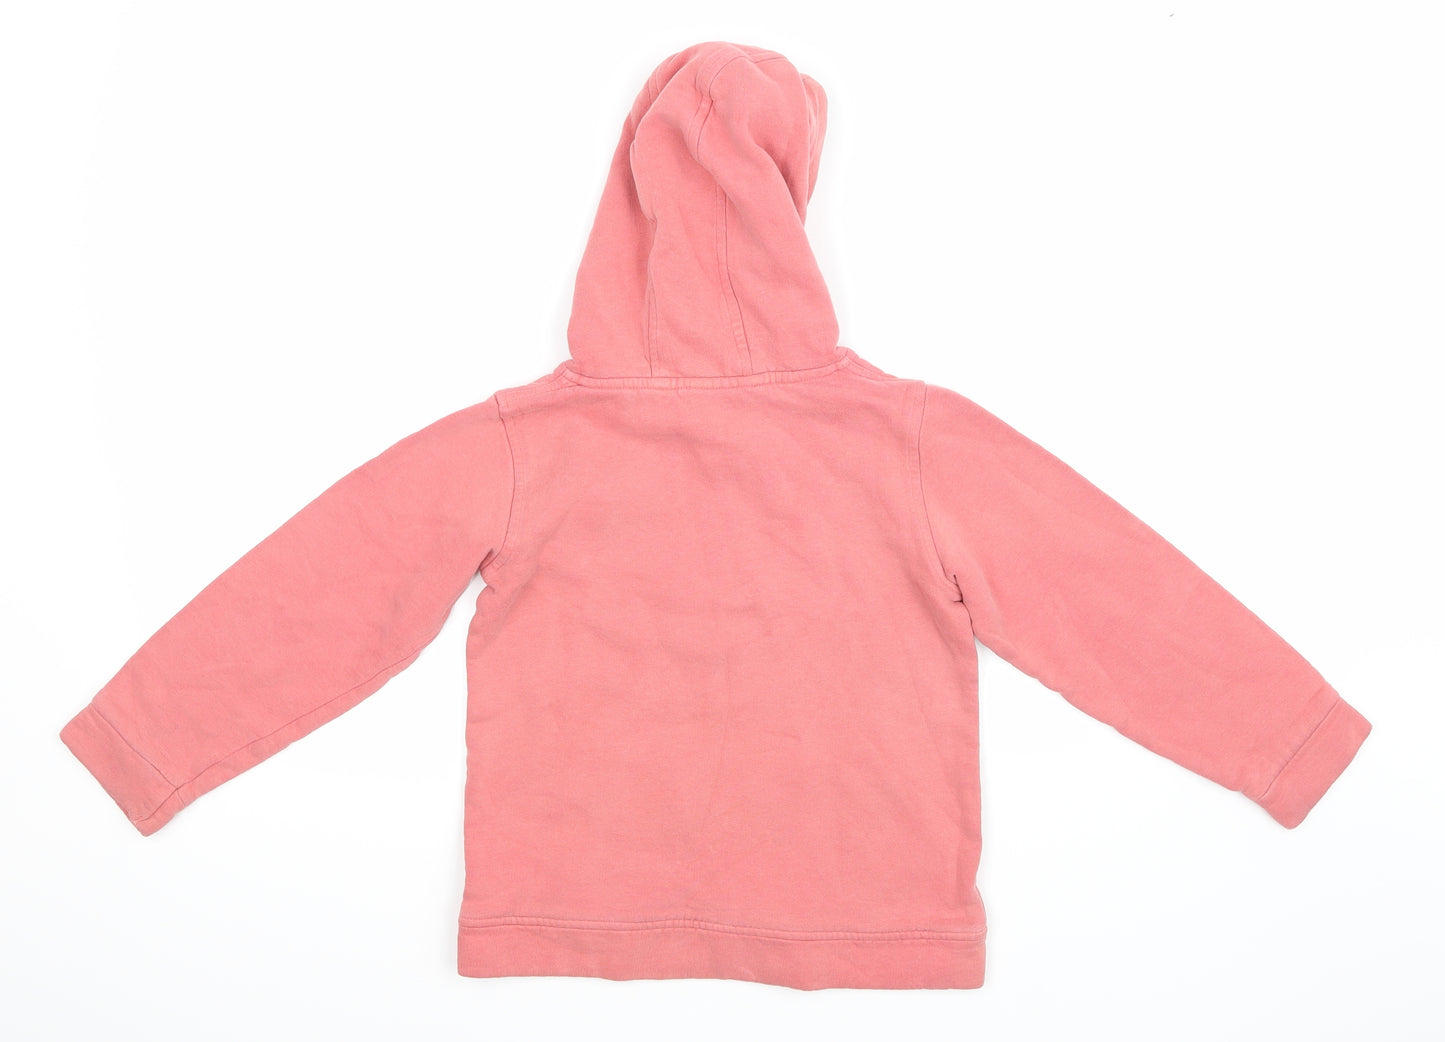 NEXT Girls Pink   Pullover Hoodie Size 7-8 Years